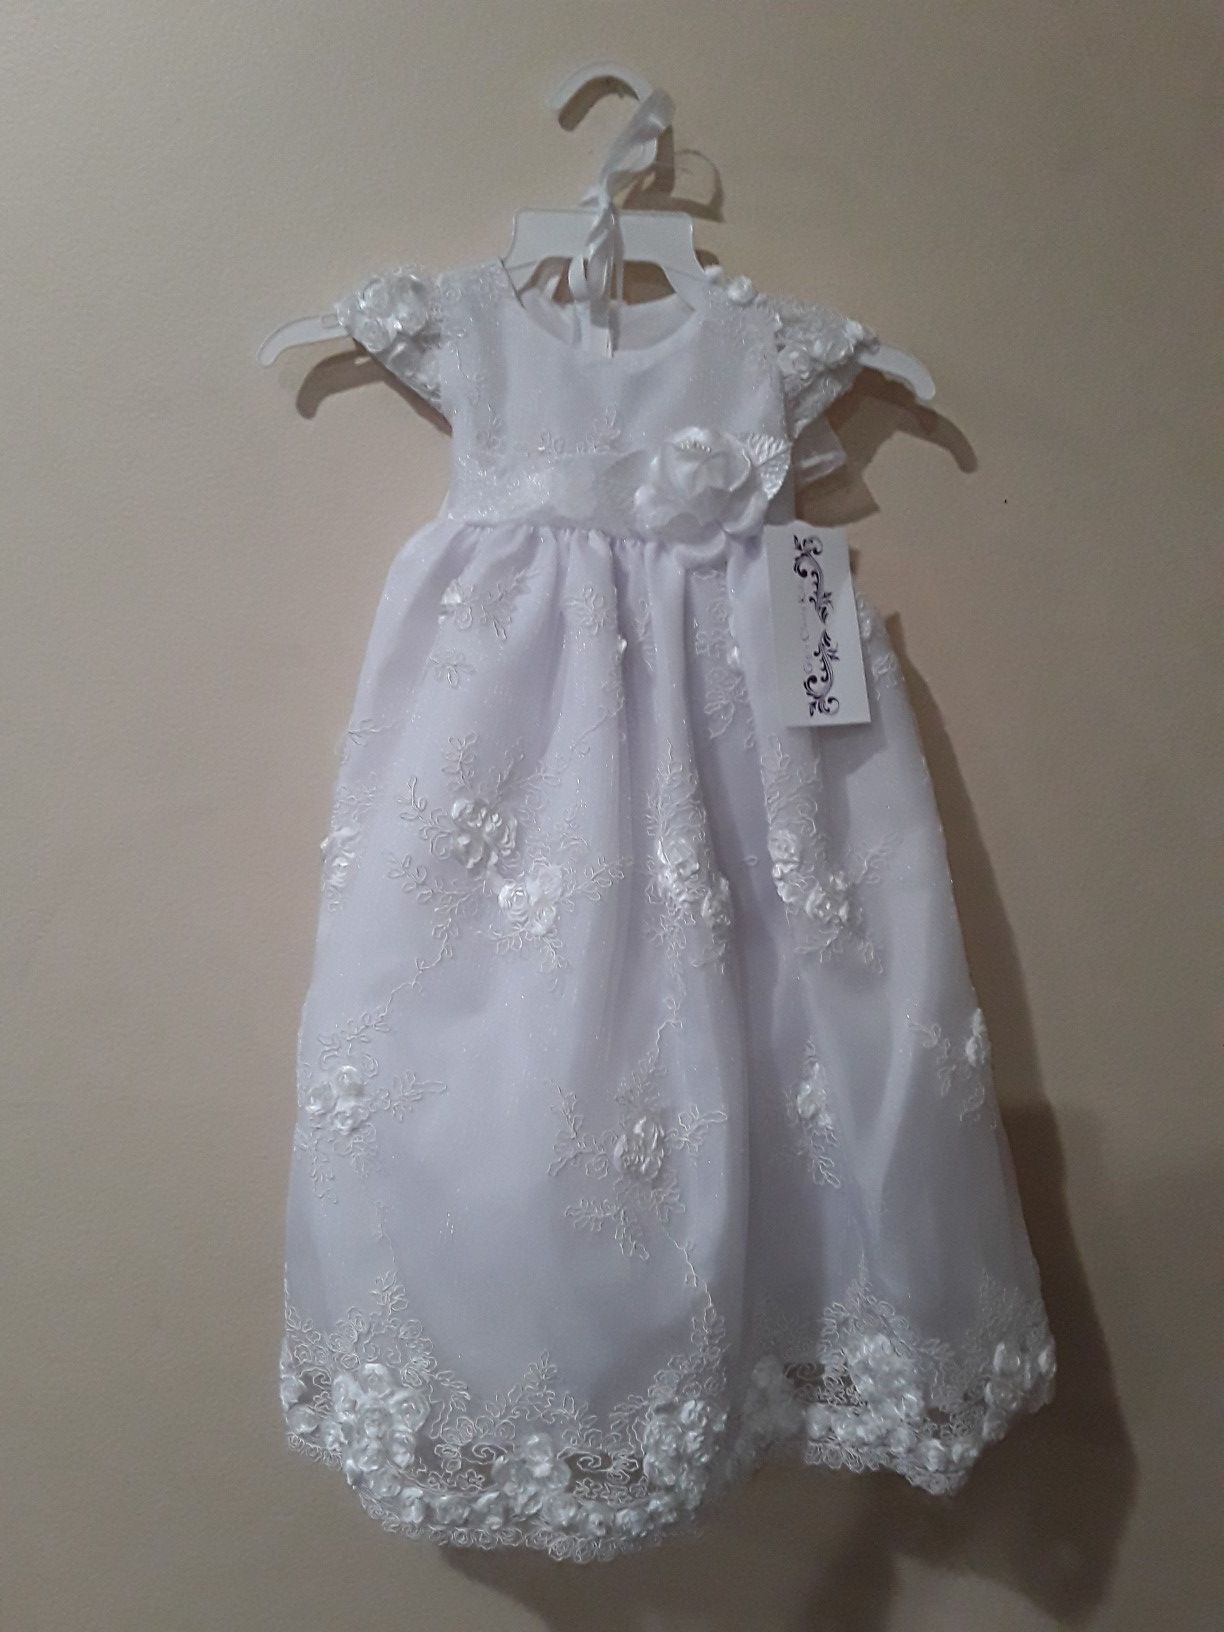 New Girls White Baptism Christening Dress Gown Size 6-9 Months